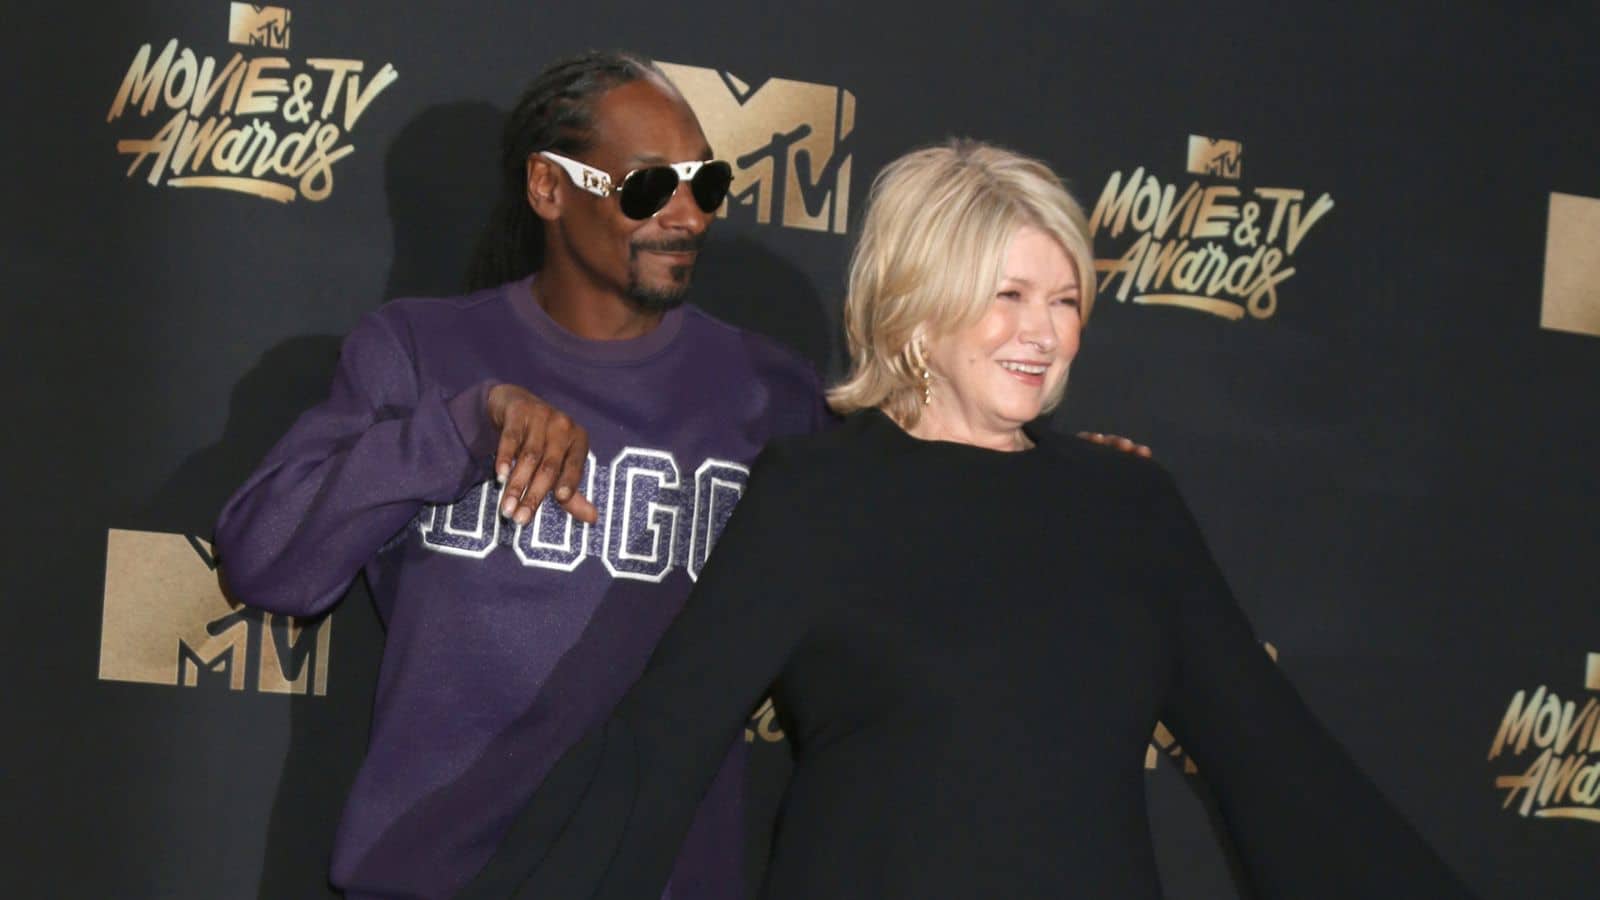 LOS ANGELES - MAY 7: Snoop Dogg, Martha Stewart at the MTV Movie and Television Awards on the Shrine Auditorium on May 7, 2017 in Los Angeles, CA